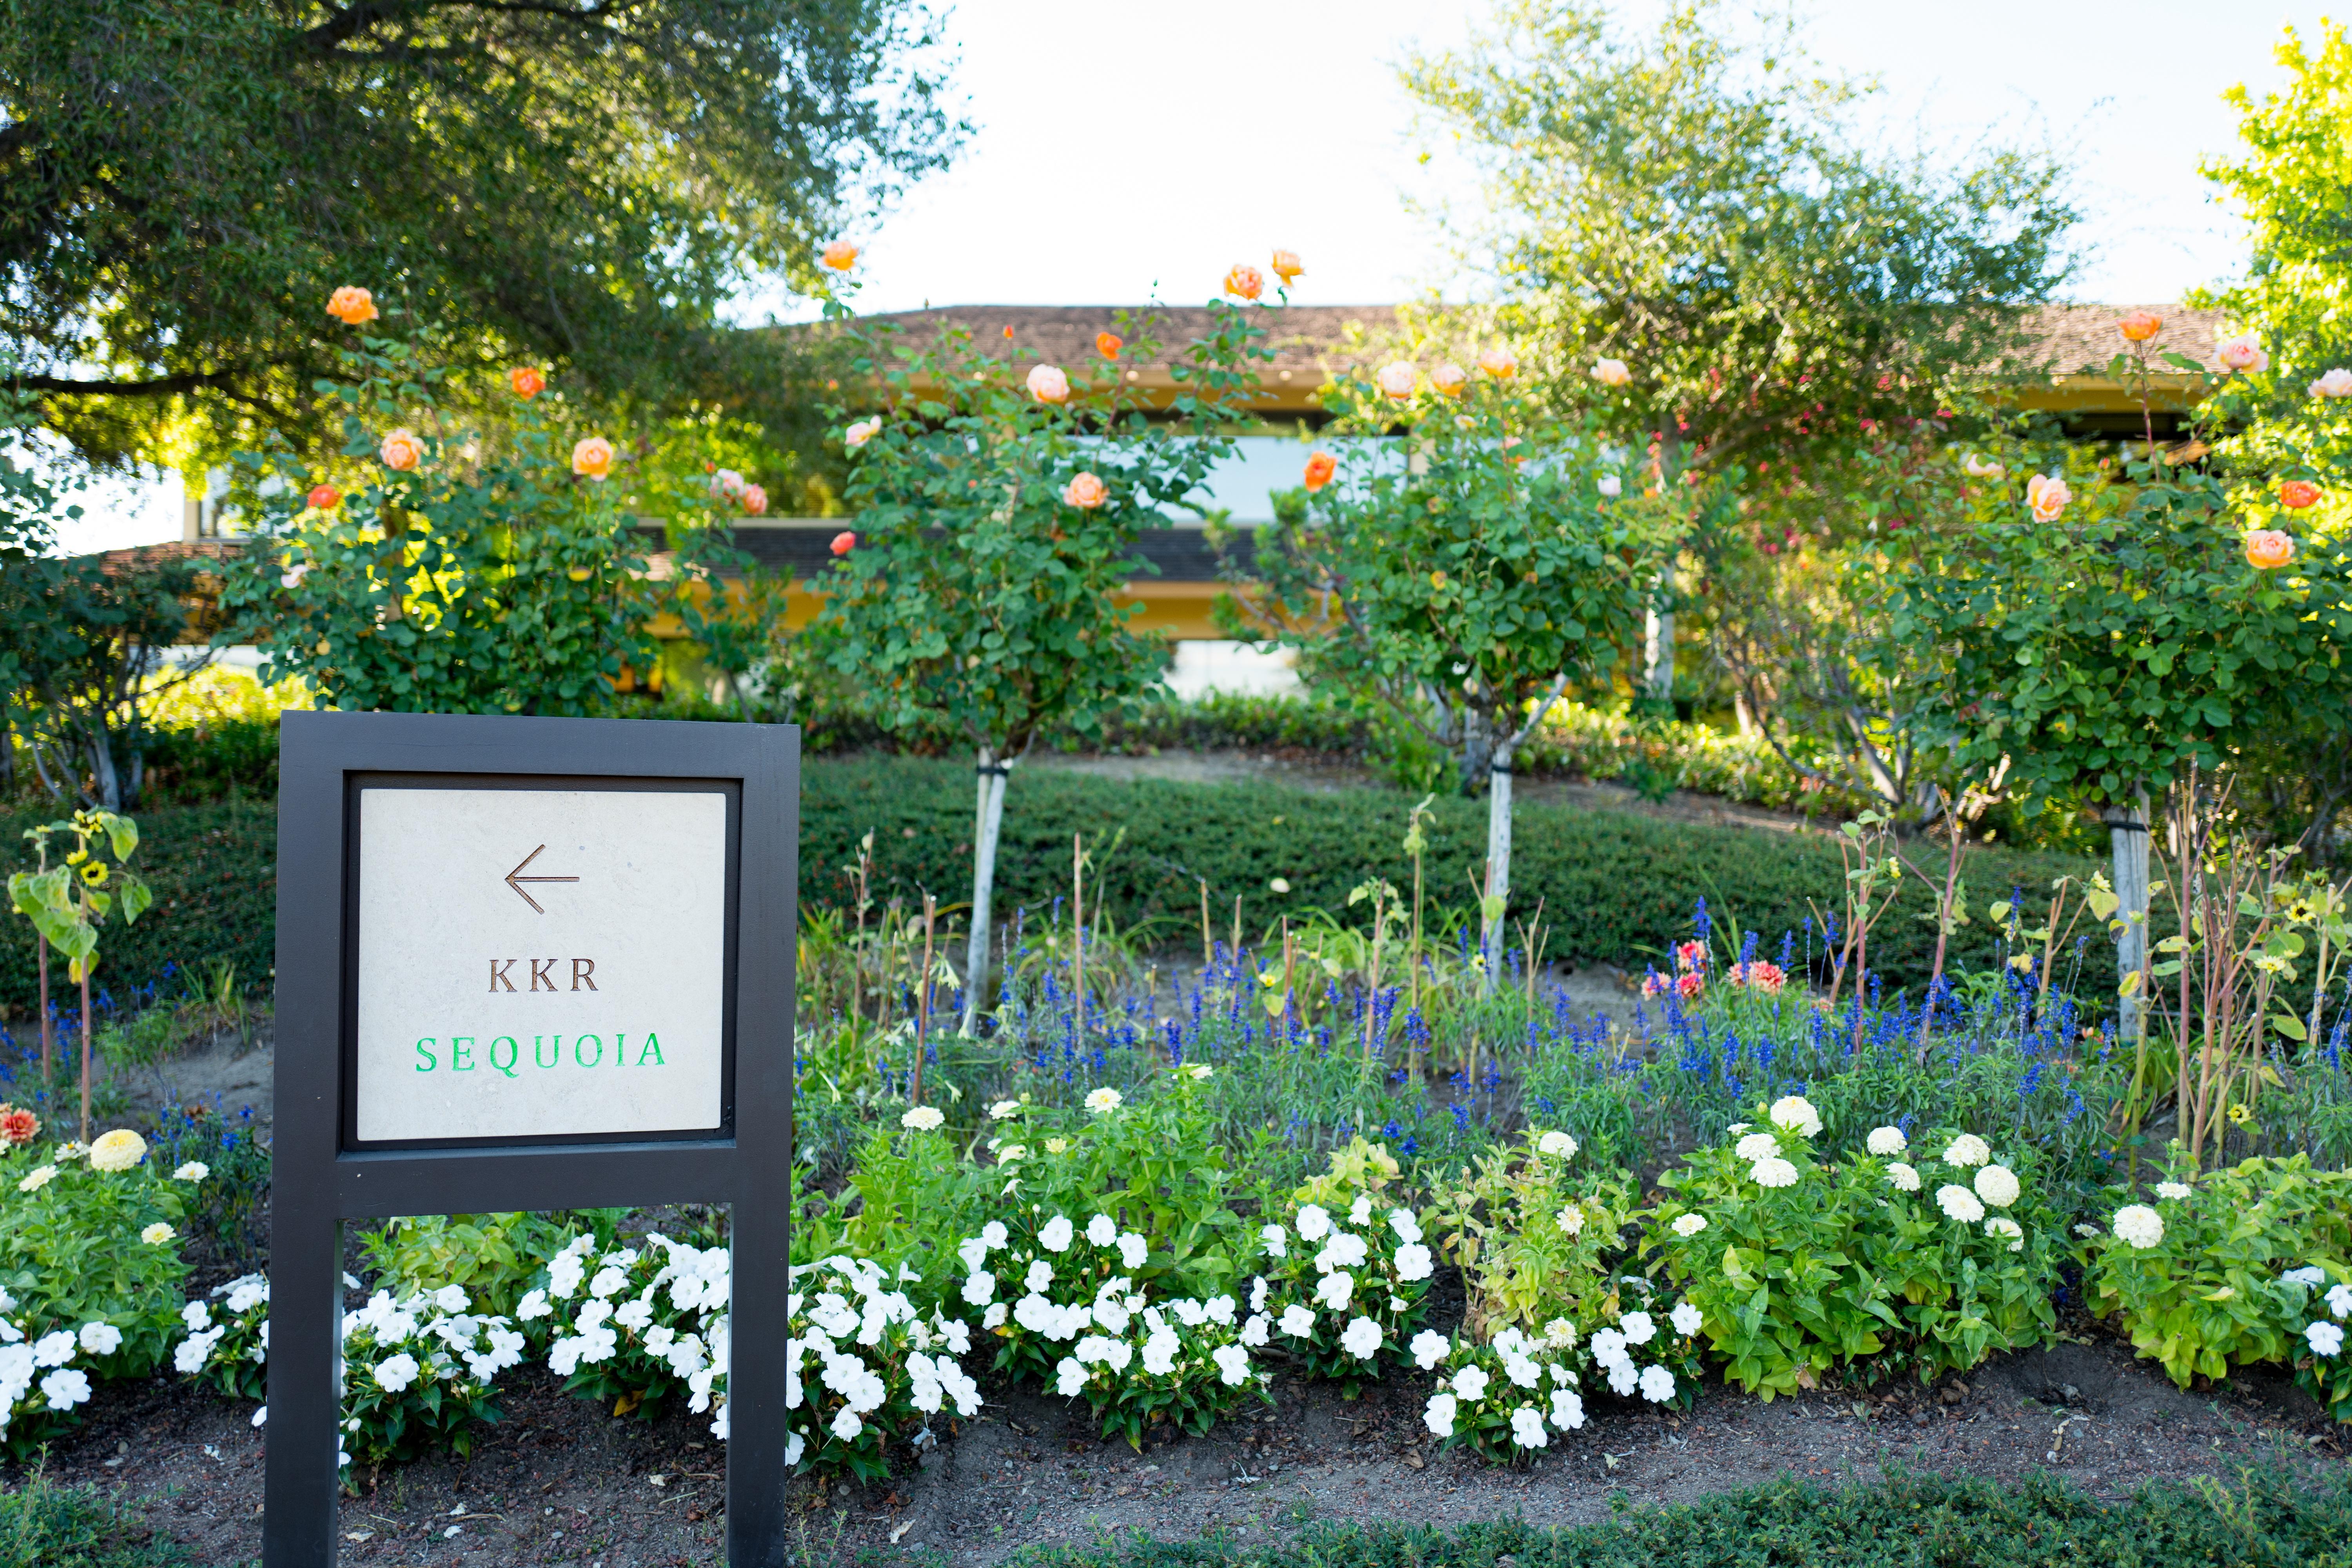 A KKR sign in front of a flower bed.